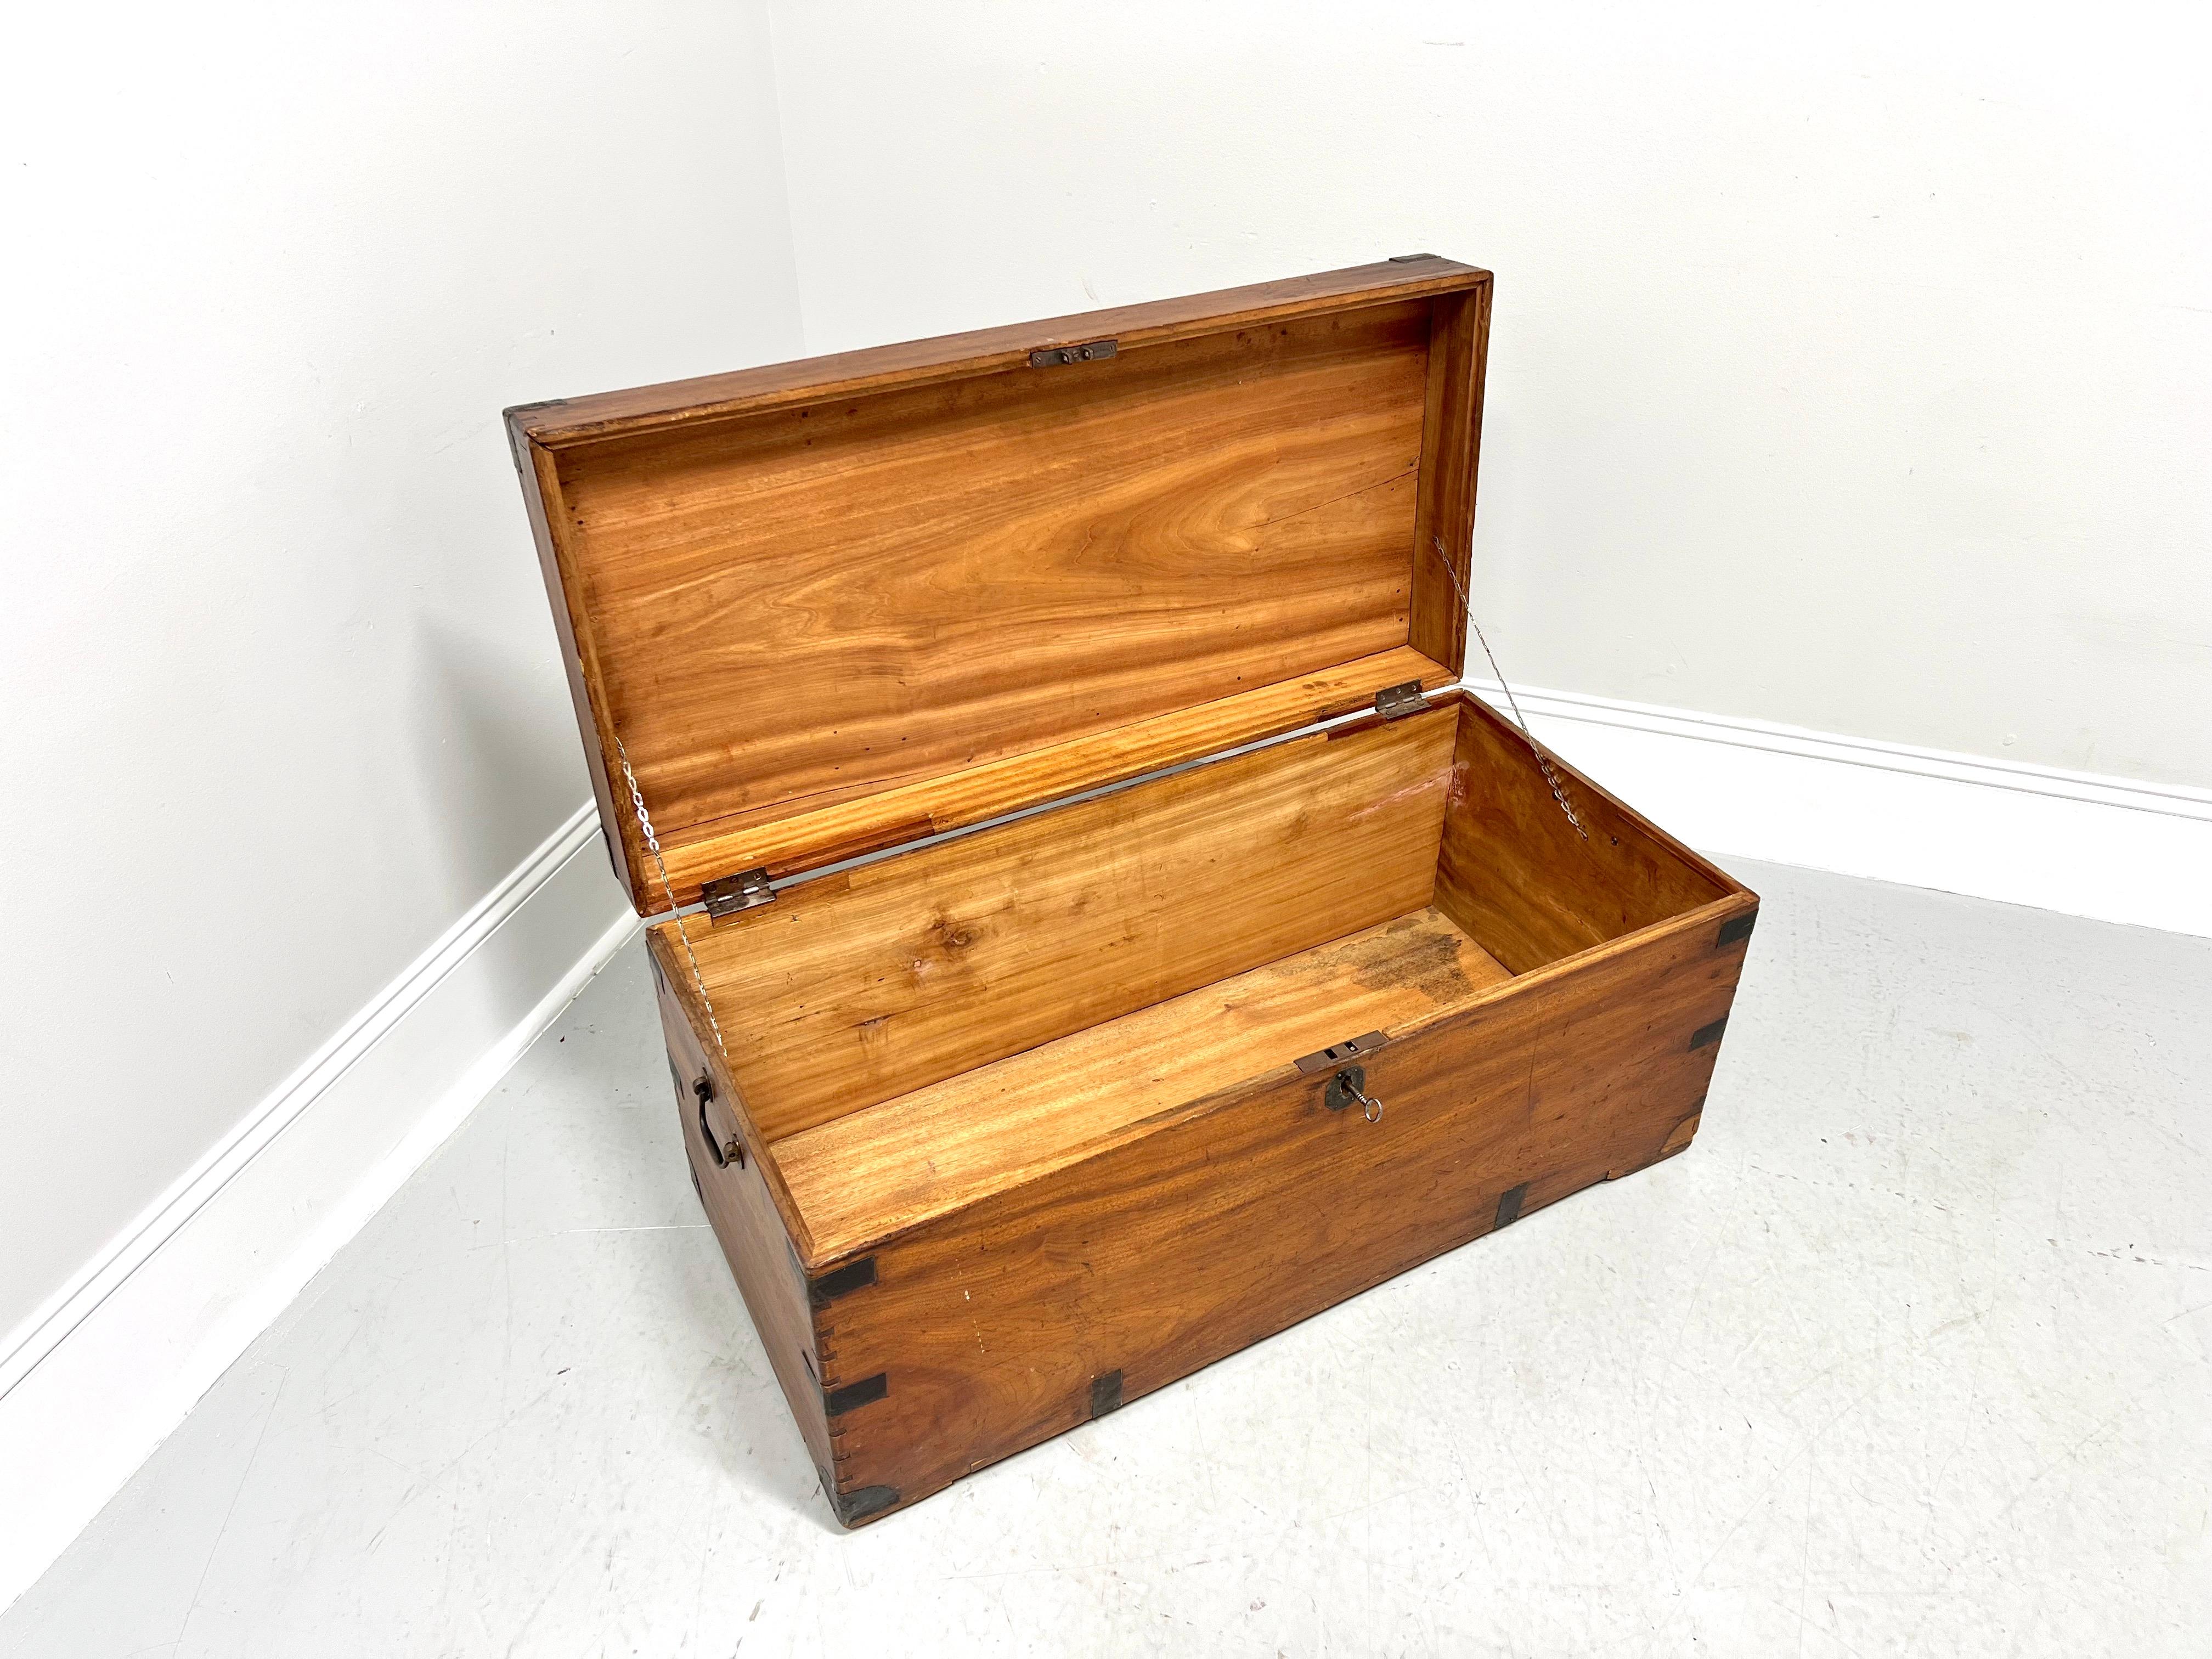 A 19th Century Campaign style sea captain's military trunk, unbranded. Solid camphorwood, brass accents to protect corners & sides, brass side handles, distinctive side joinery, working lock with key (disassembled as required by law), a hinged lid